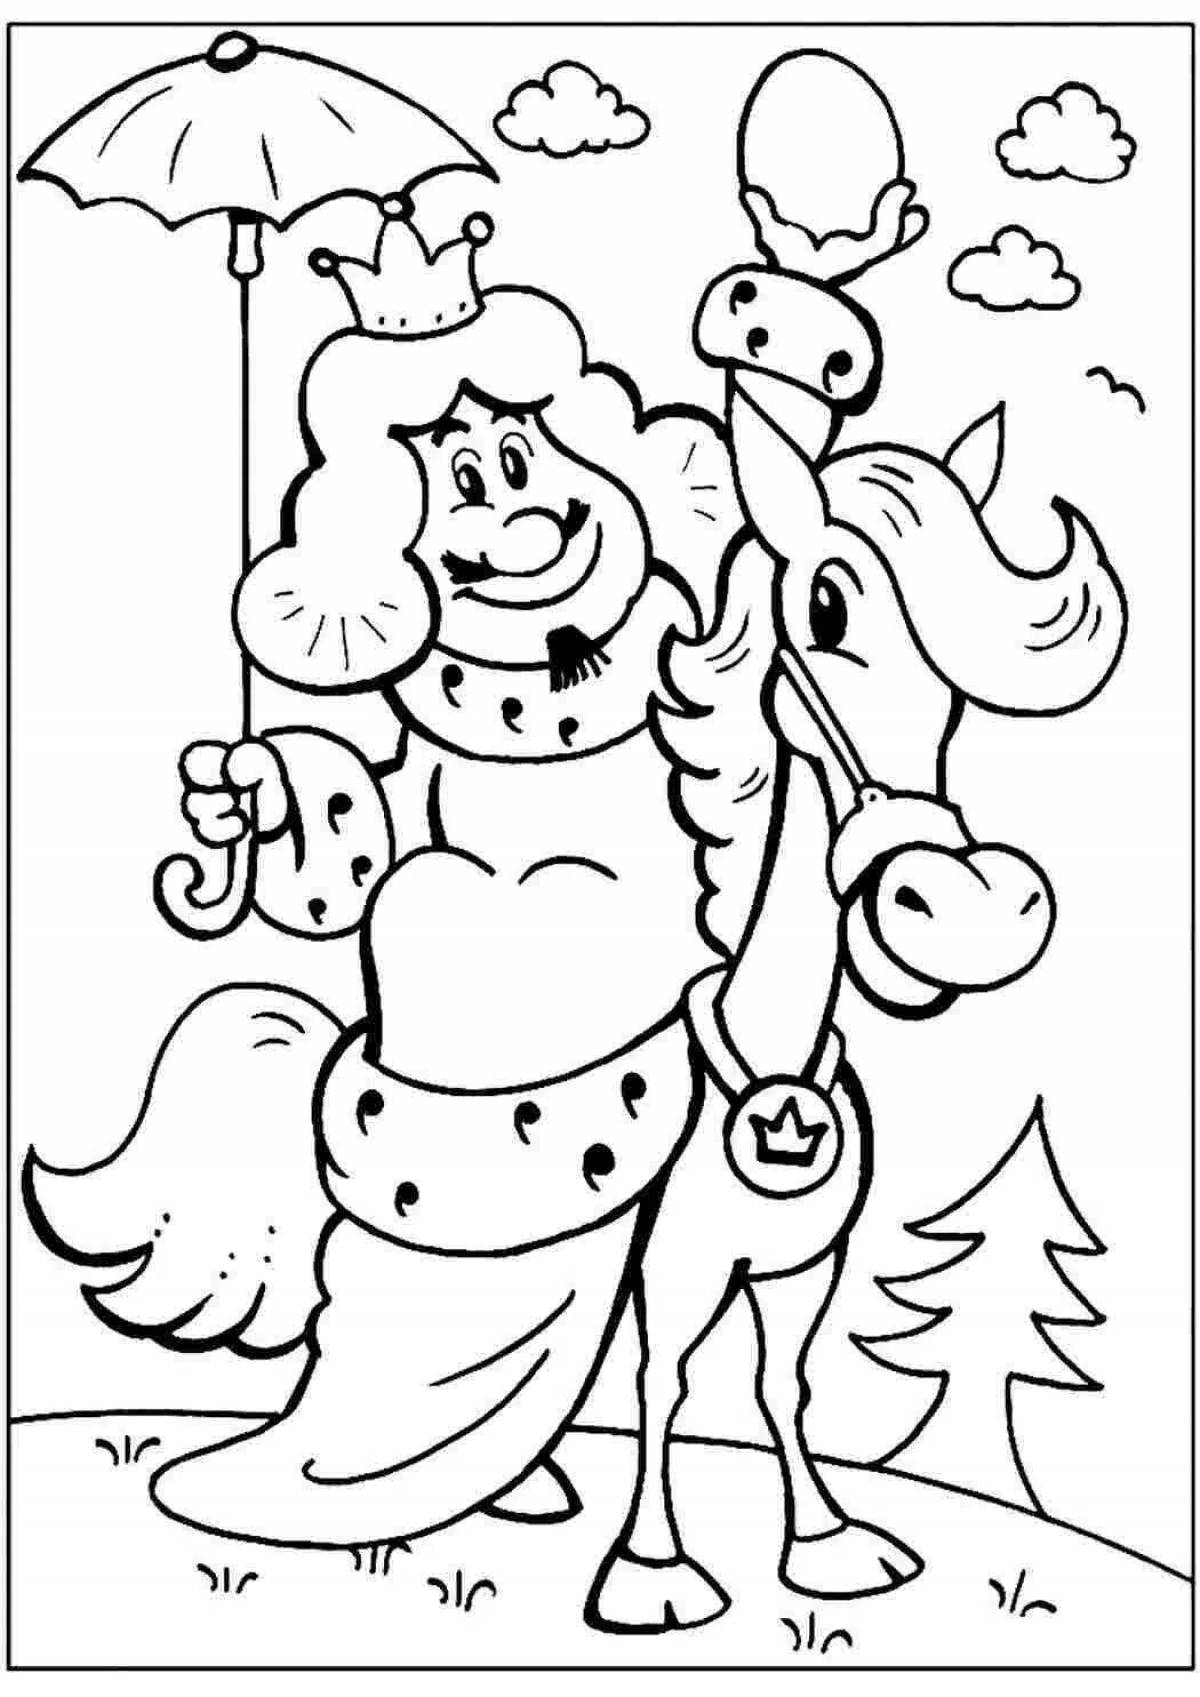 Shiny king coloring book for kids